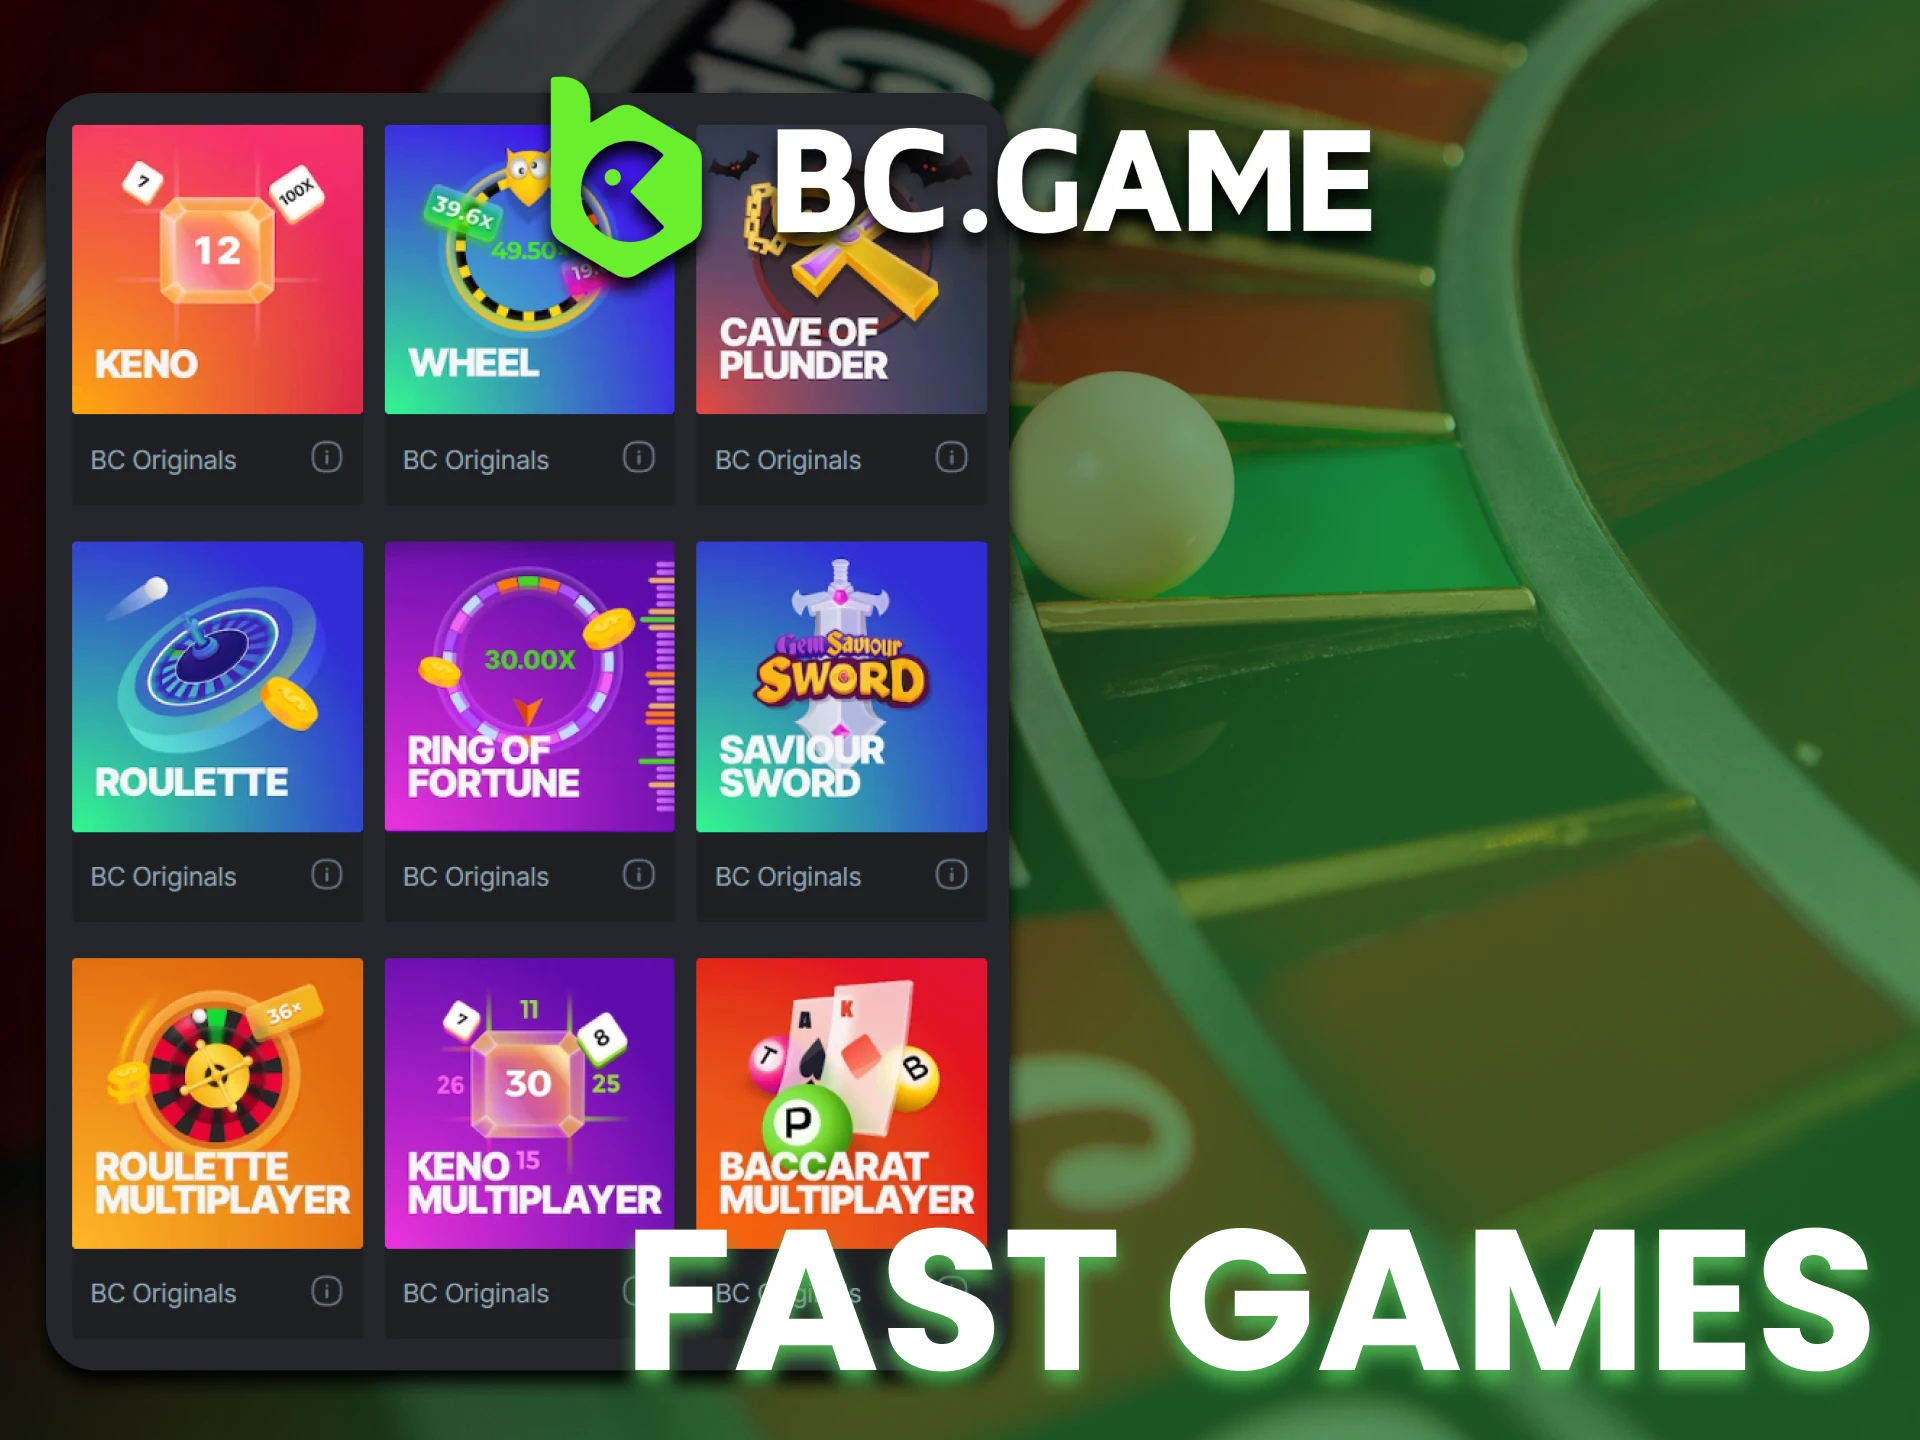 Play fast games in BC Game casino page.